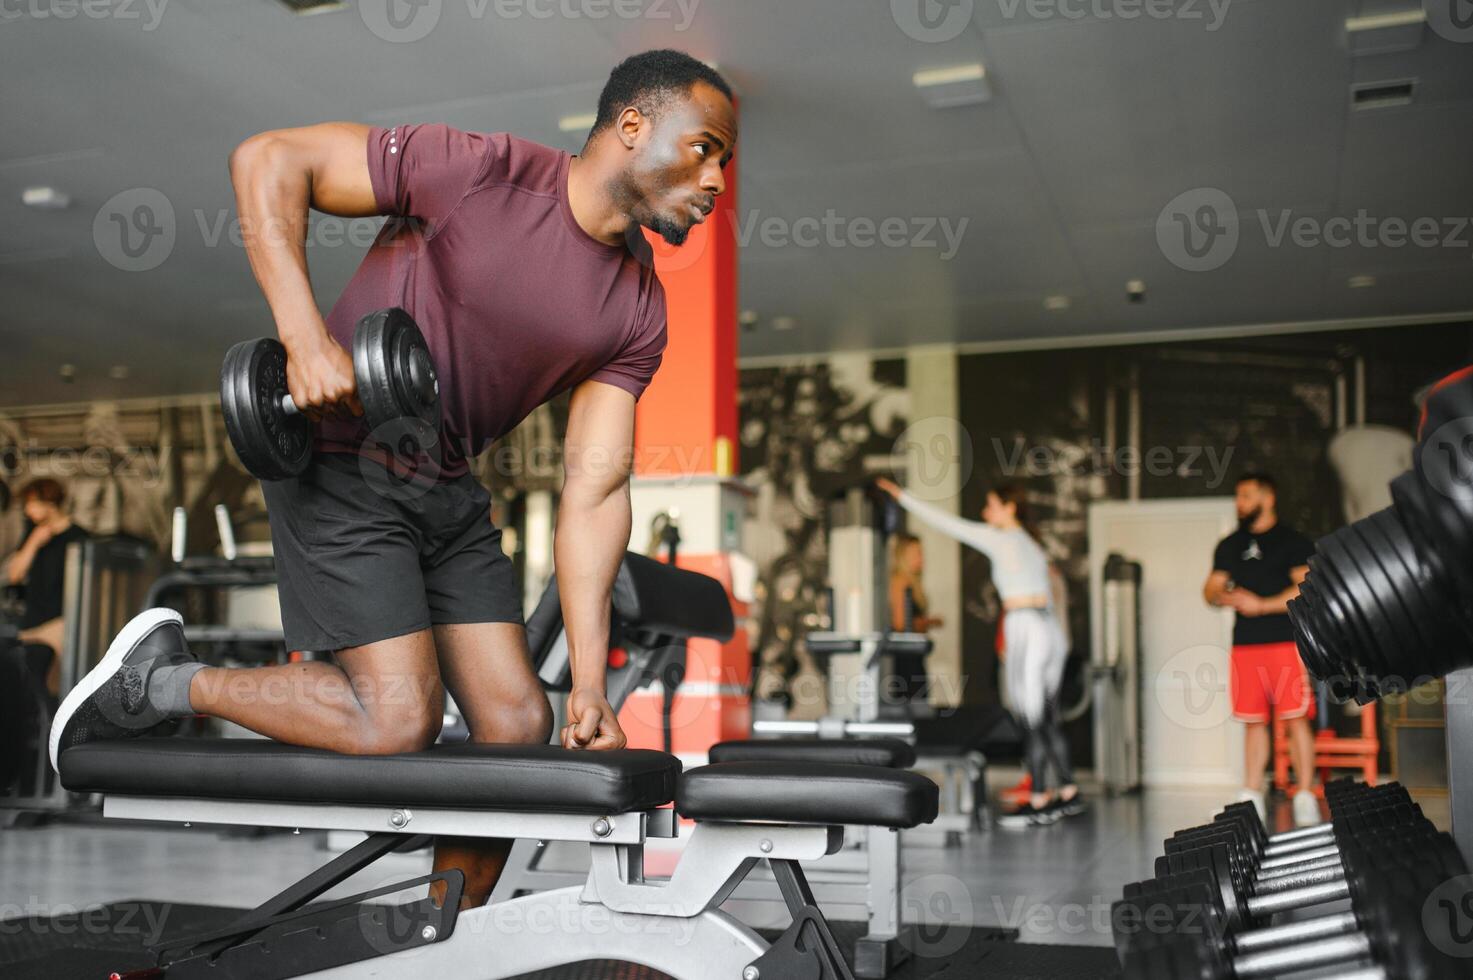 Hot african american young man bodybuilder lifting barbell at gym, working on his arms, looking at copy space. Black muscular shirtless guy having biceps workout session. Healthy lifestyle concept. photo